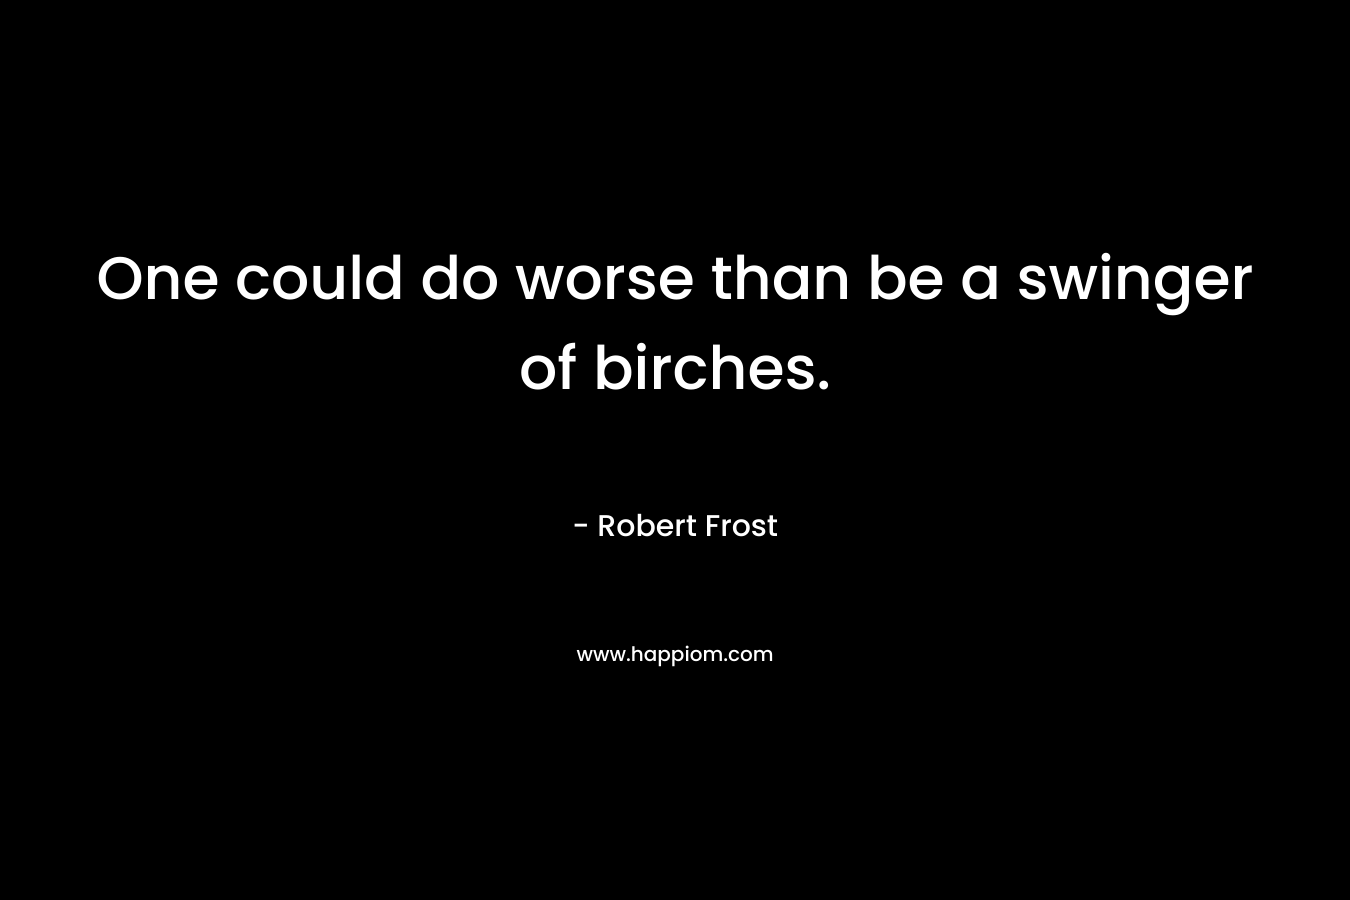 One could do worse than be a swinger of birches. – Robert Frost